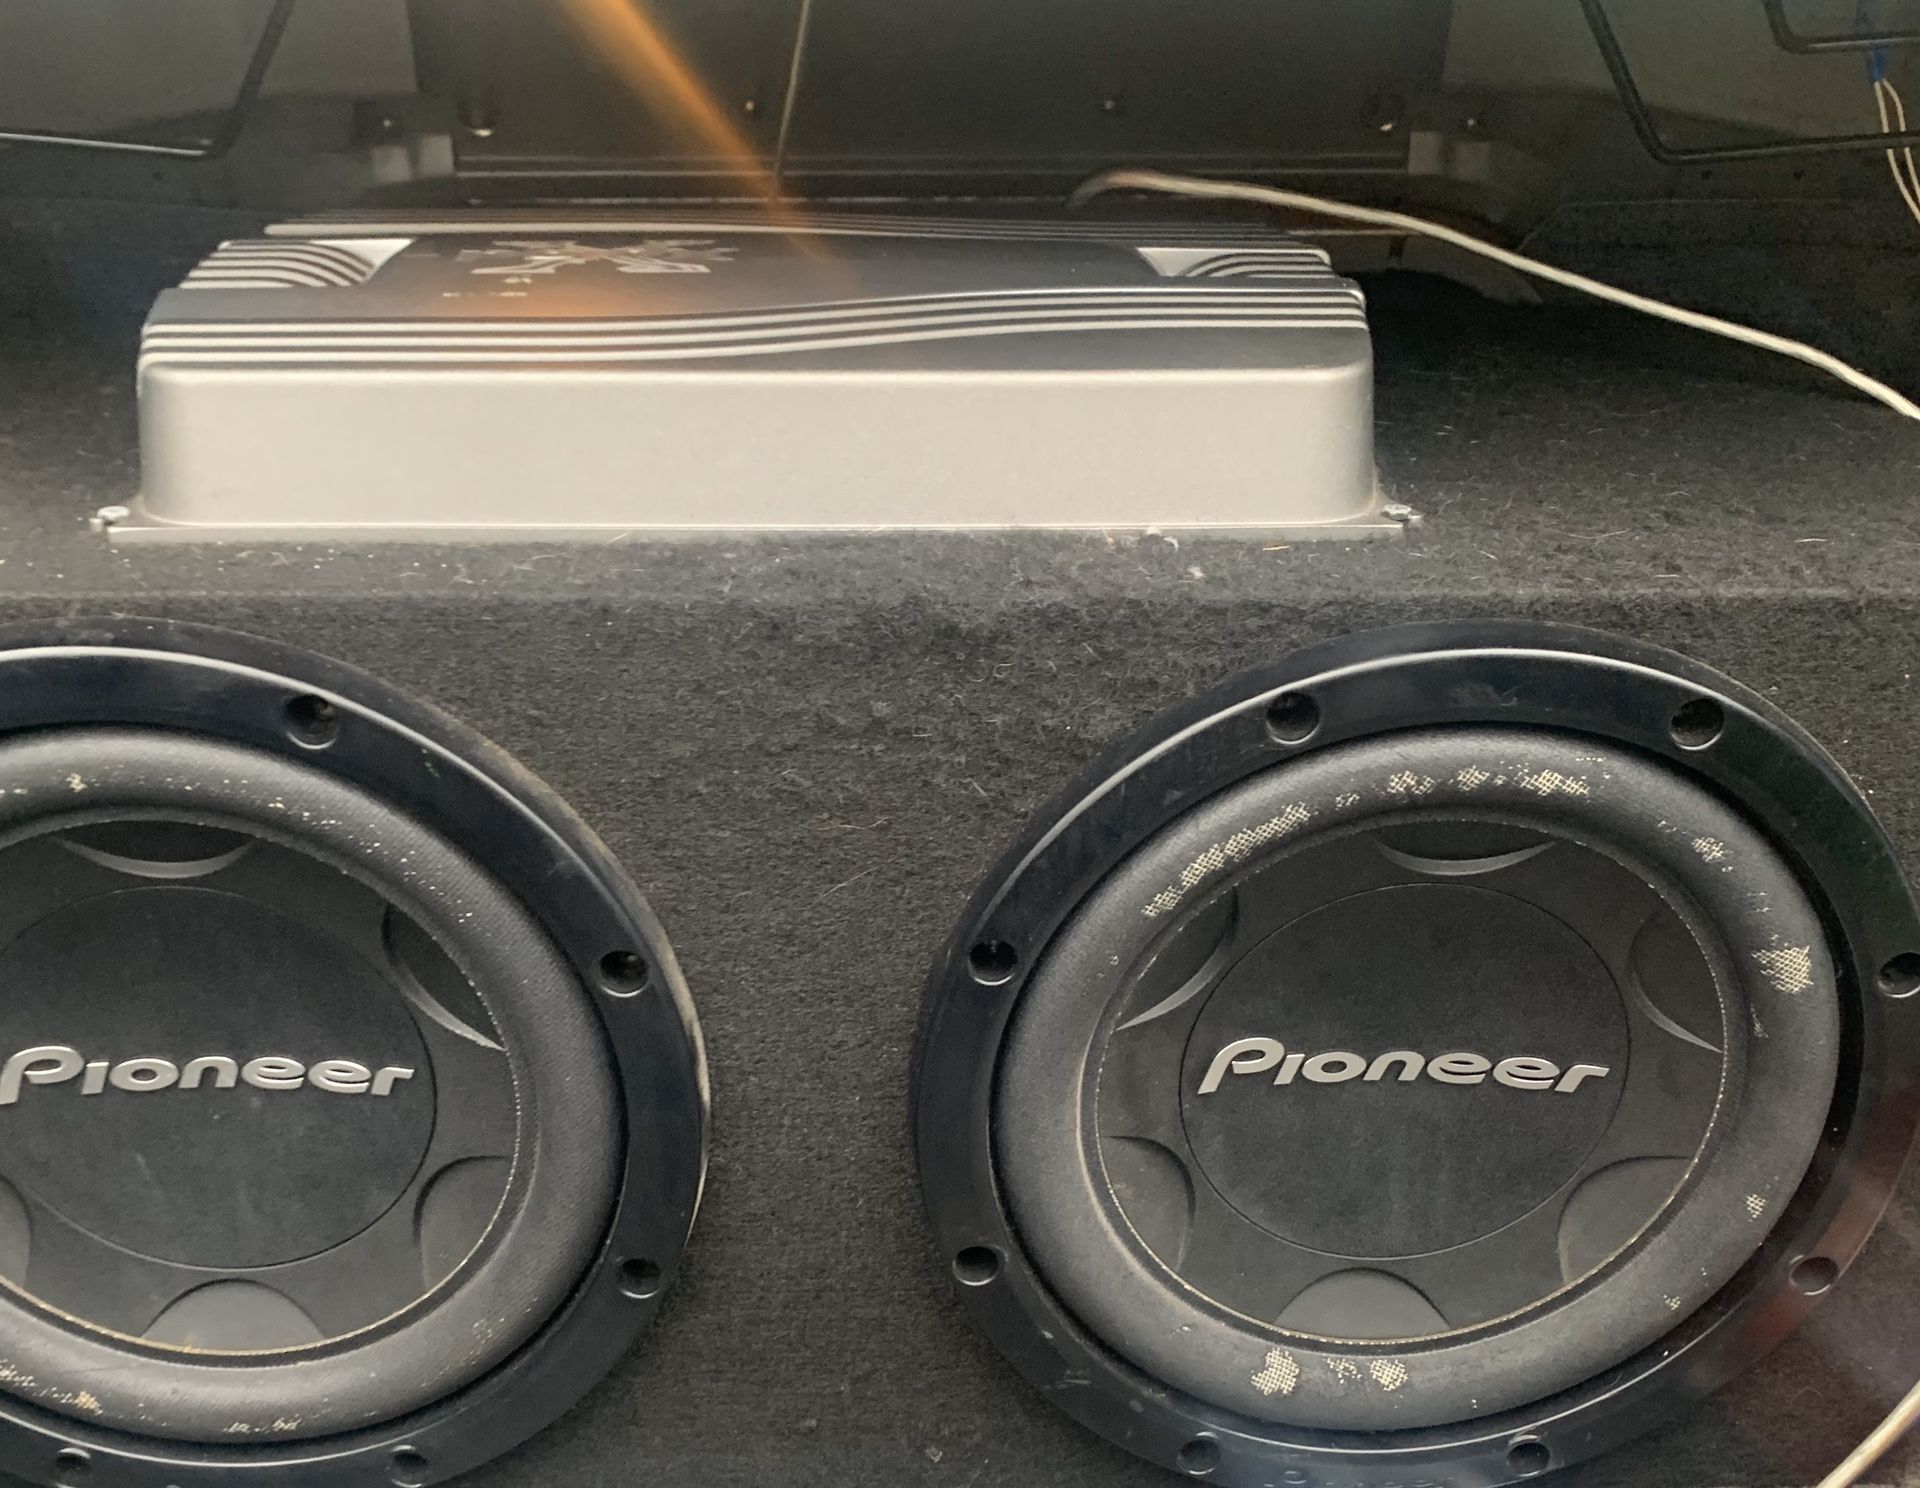 Pioneer amp with subwoofers